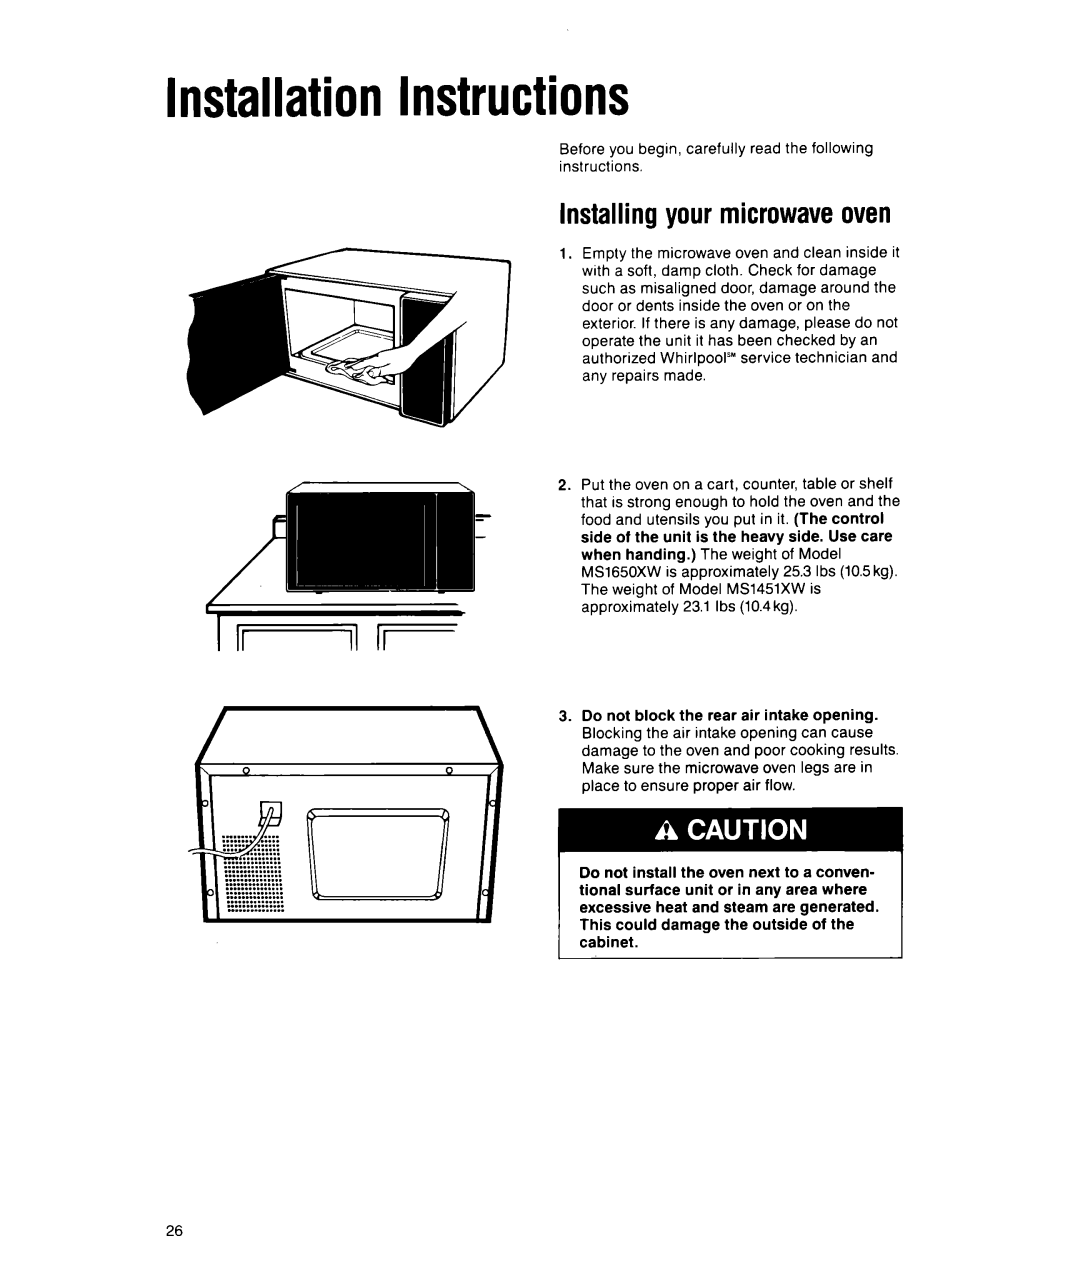 Whirlpool MS1650XW, MS1451XWI manual Installation Instructions, Installing your microwaveoven 